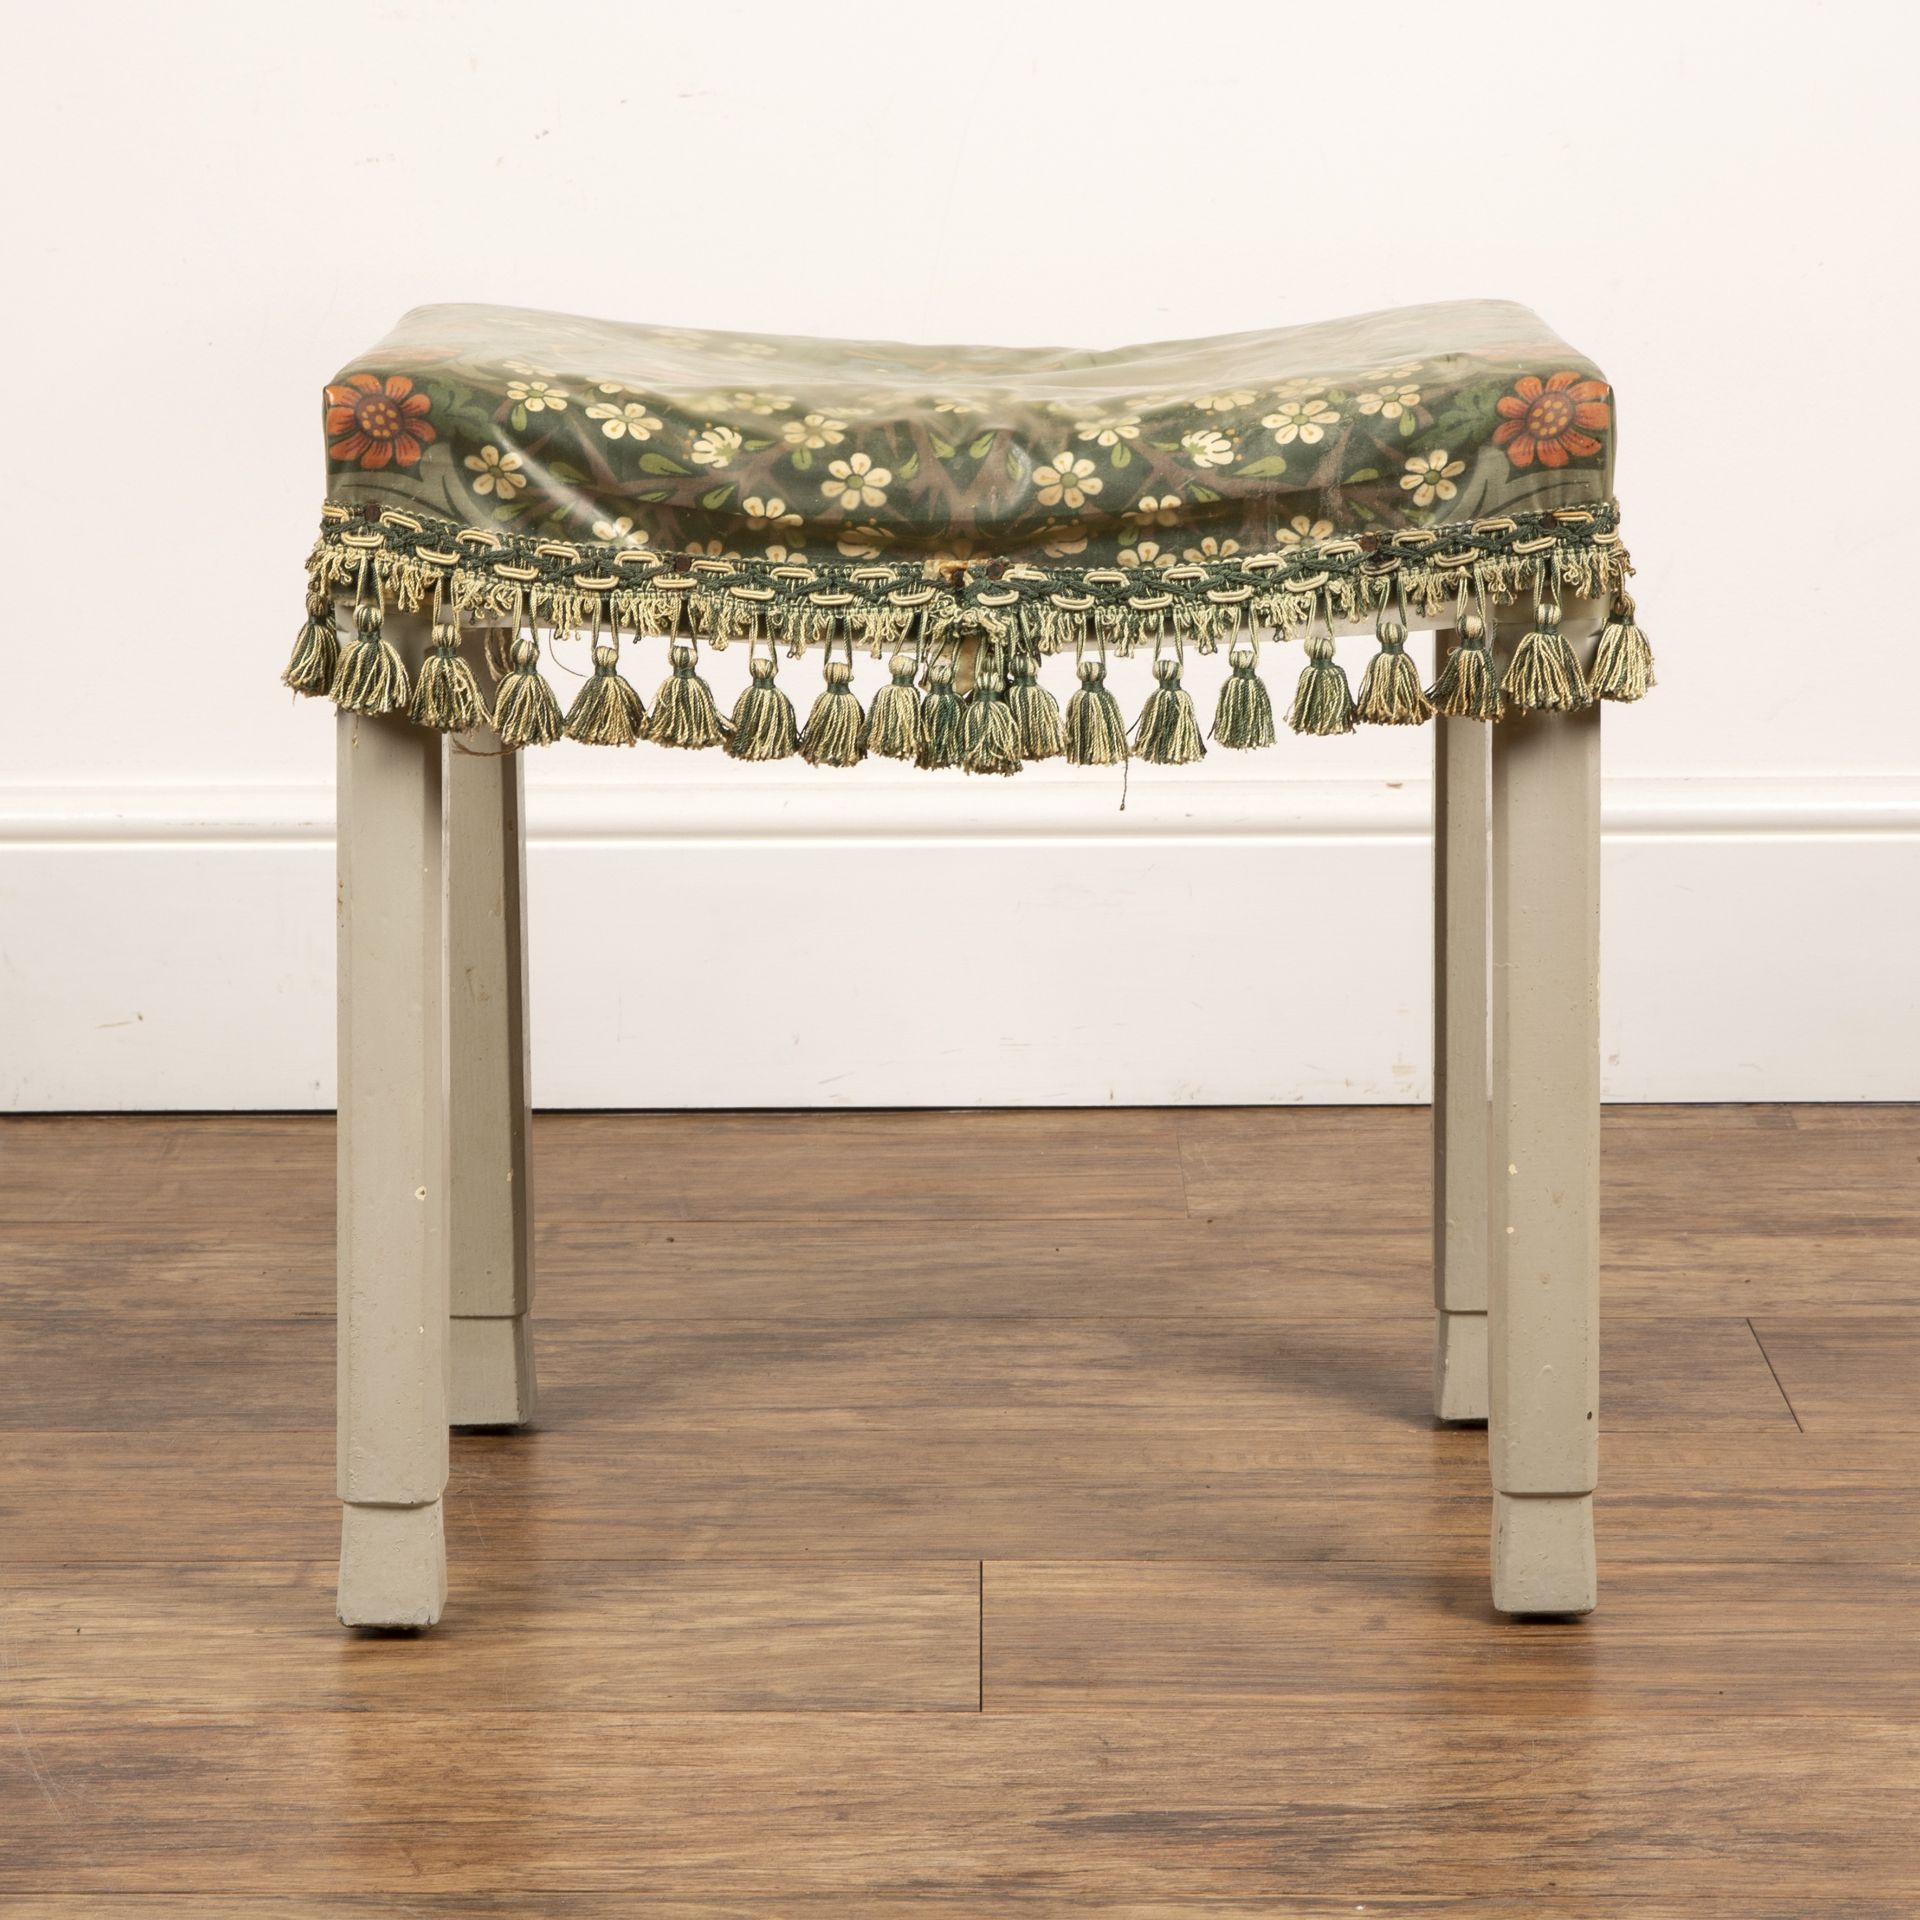 George VI Coronation stool 1937, obscured stamp underneath, has been painted and recovered with - Image 3 of 6